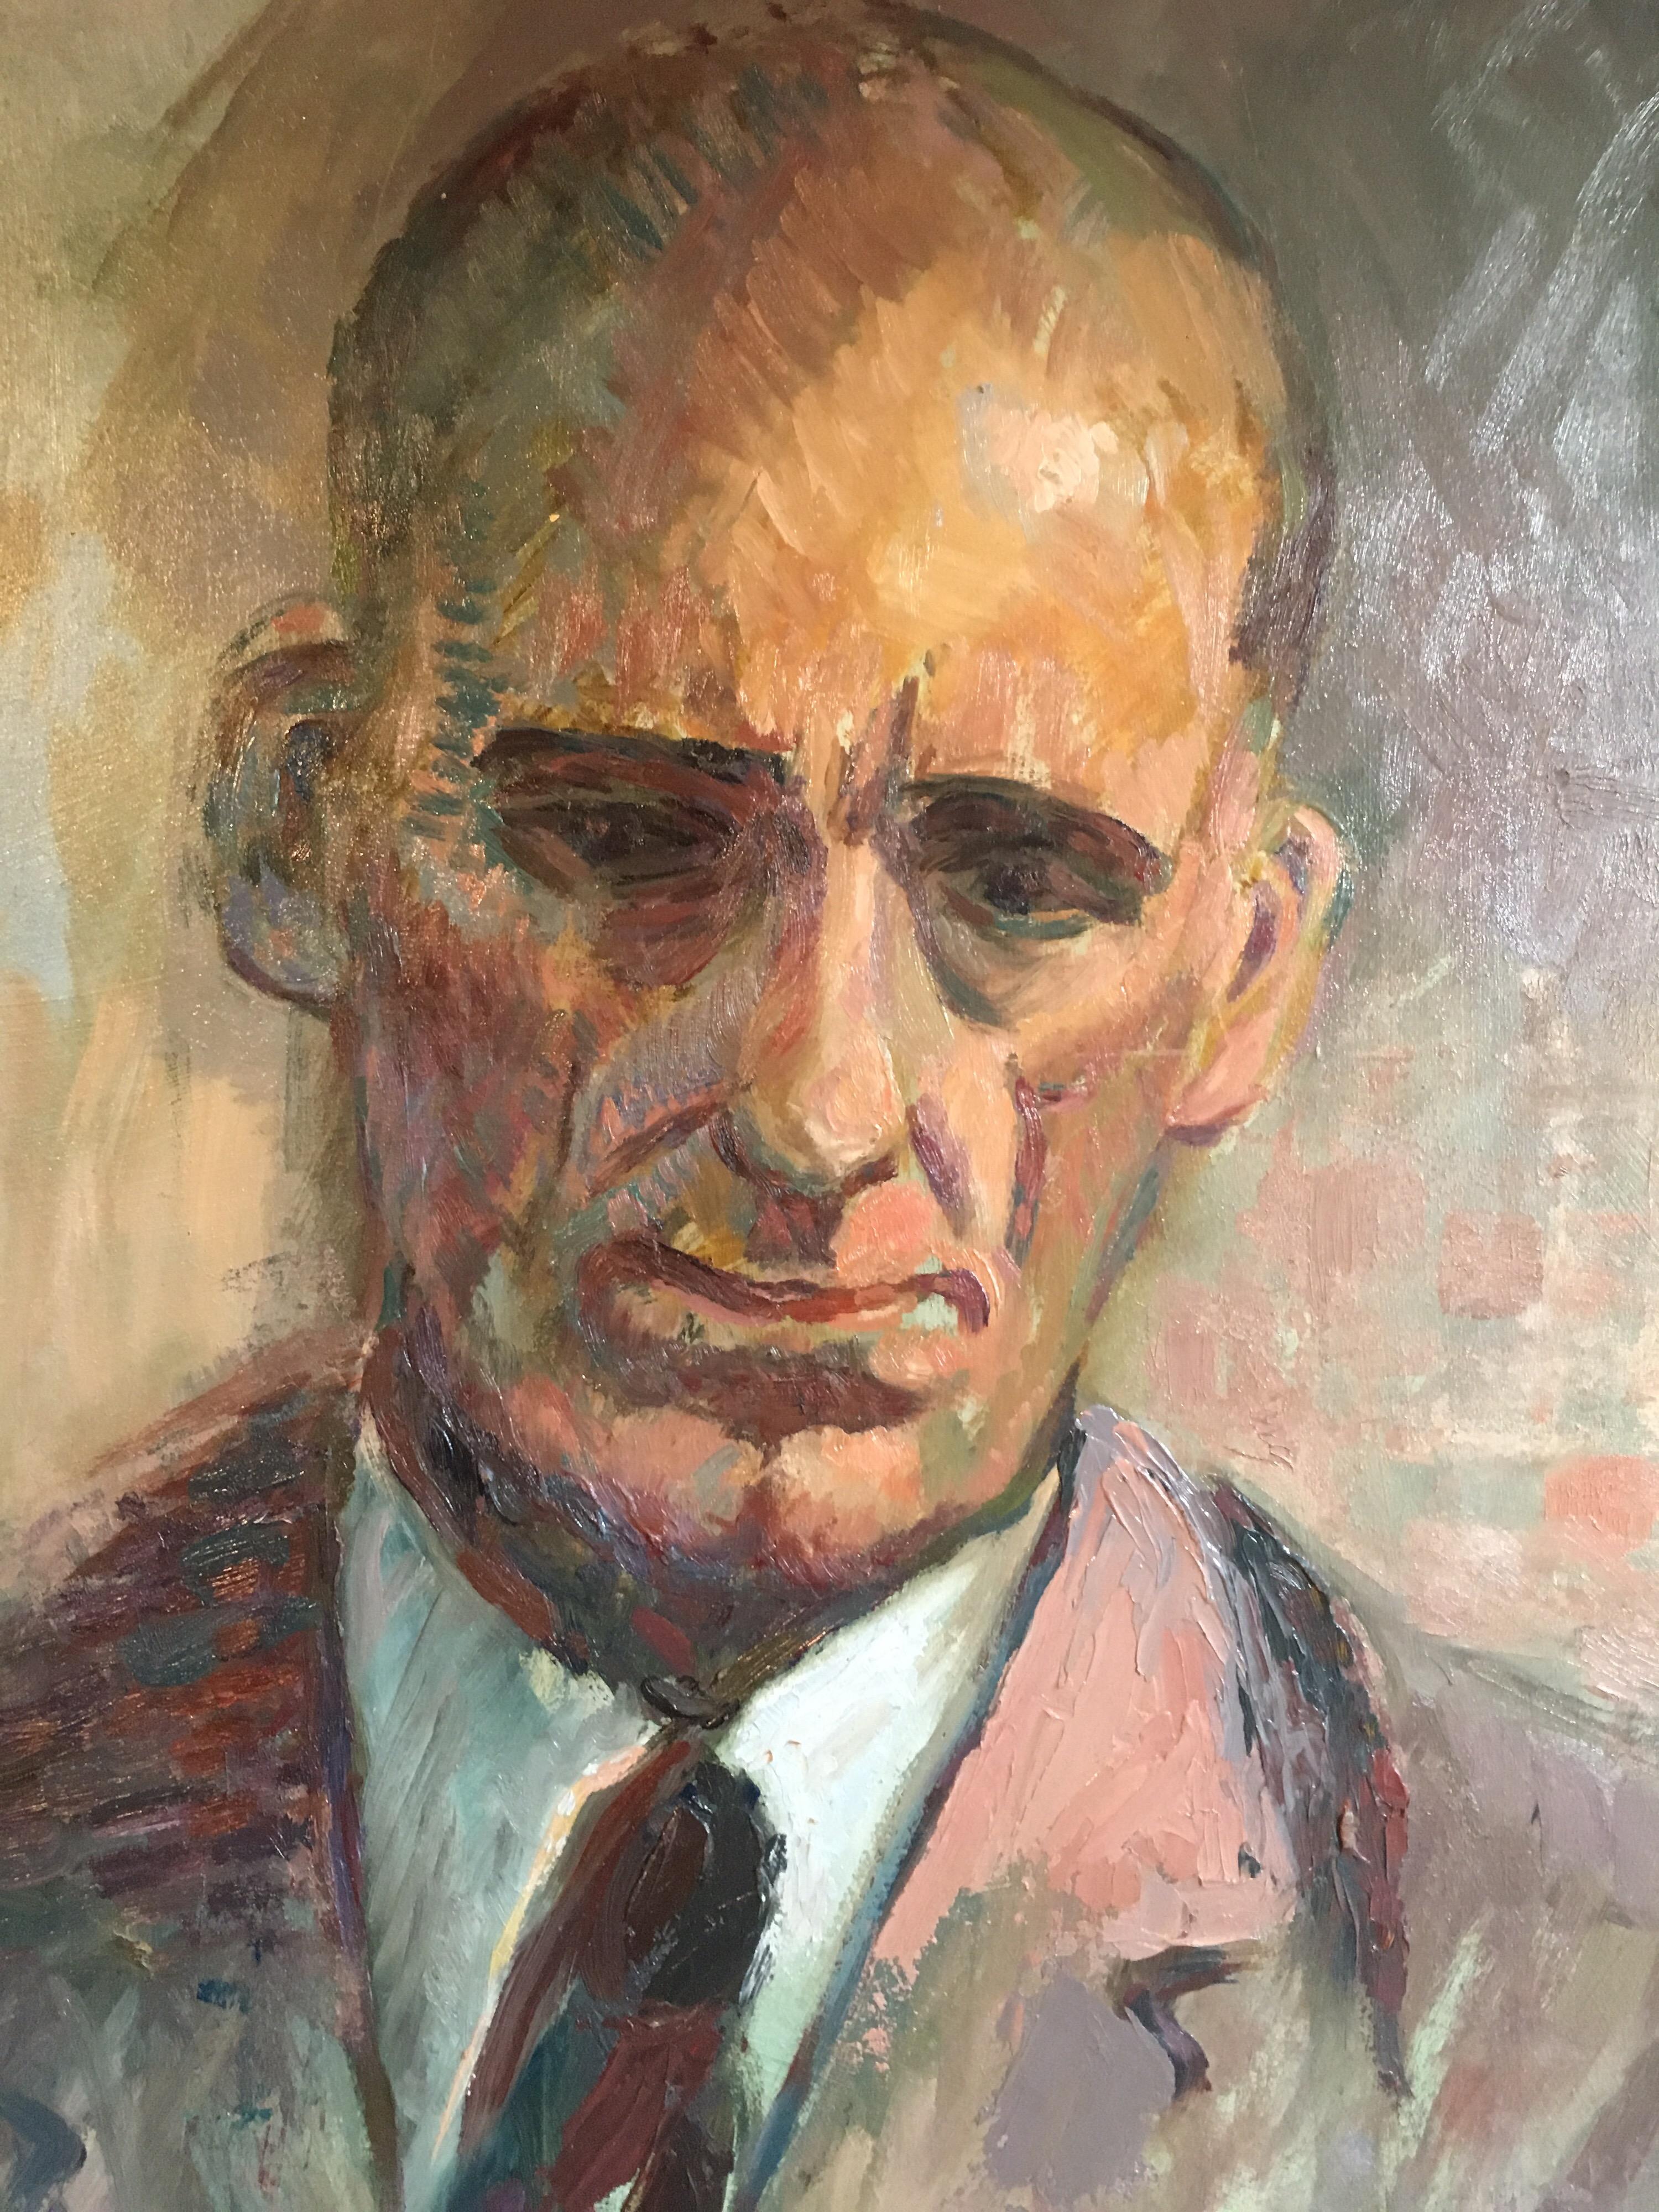 Sombre Gentlemen, Male Portrait, Original Impressionist Oil Painting
British School, Mid 20th Century
Oil painting on board, unframed
Board size: 18 x 24 inches

Incredibly stylish portrait of a gentlemen. This style of impressionist portraits,